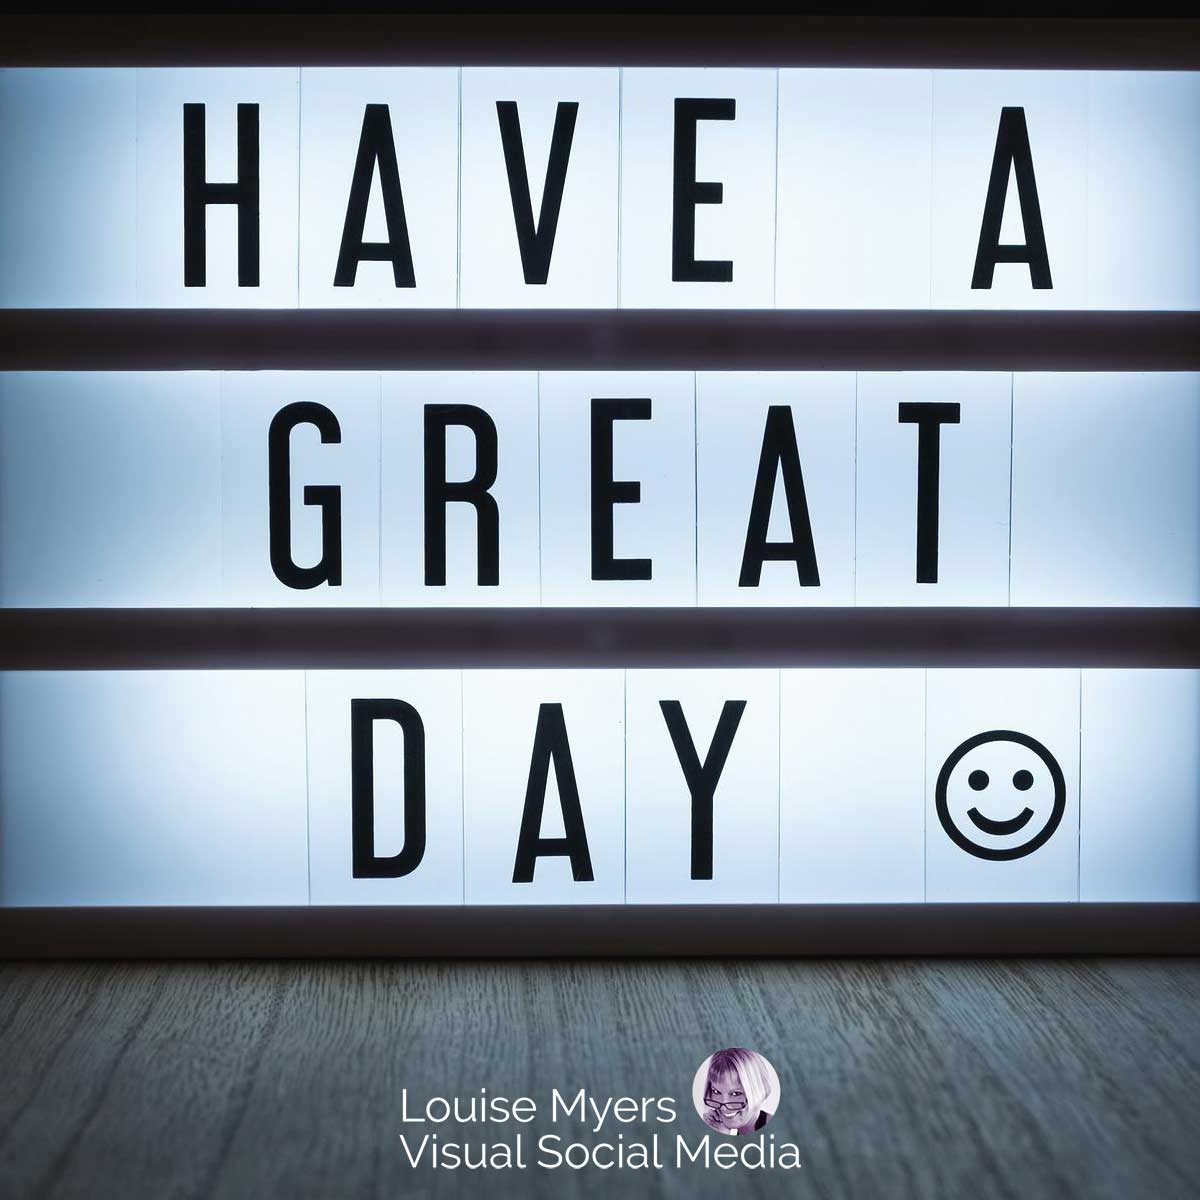 letter lightbox spells out have a great day with smiley face emoji.